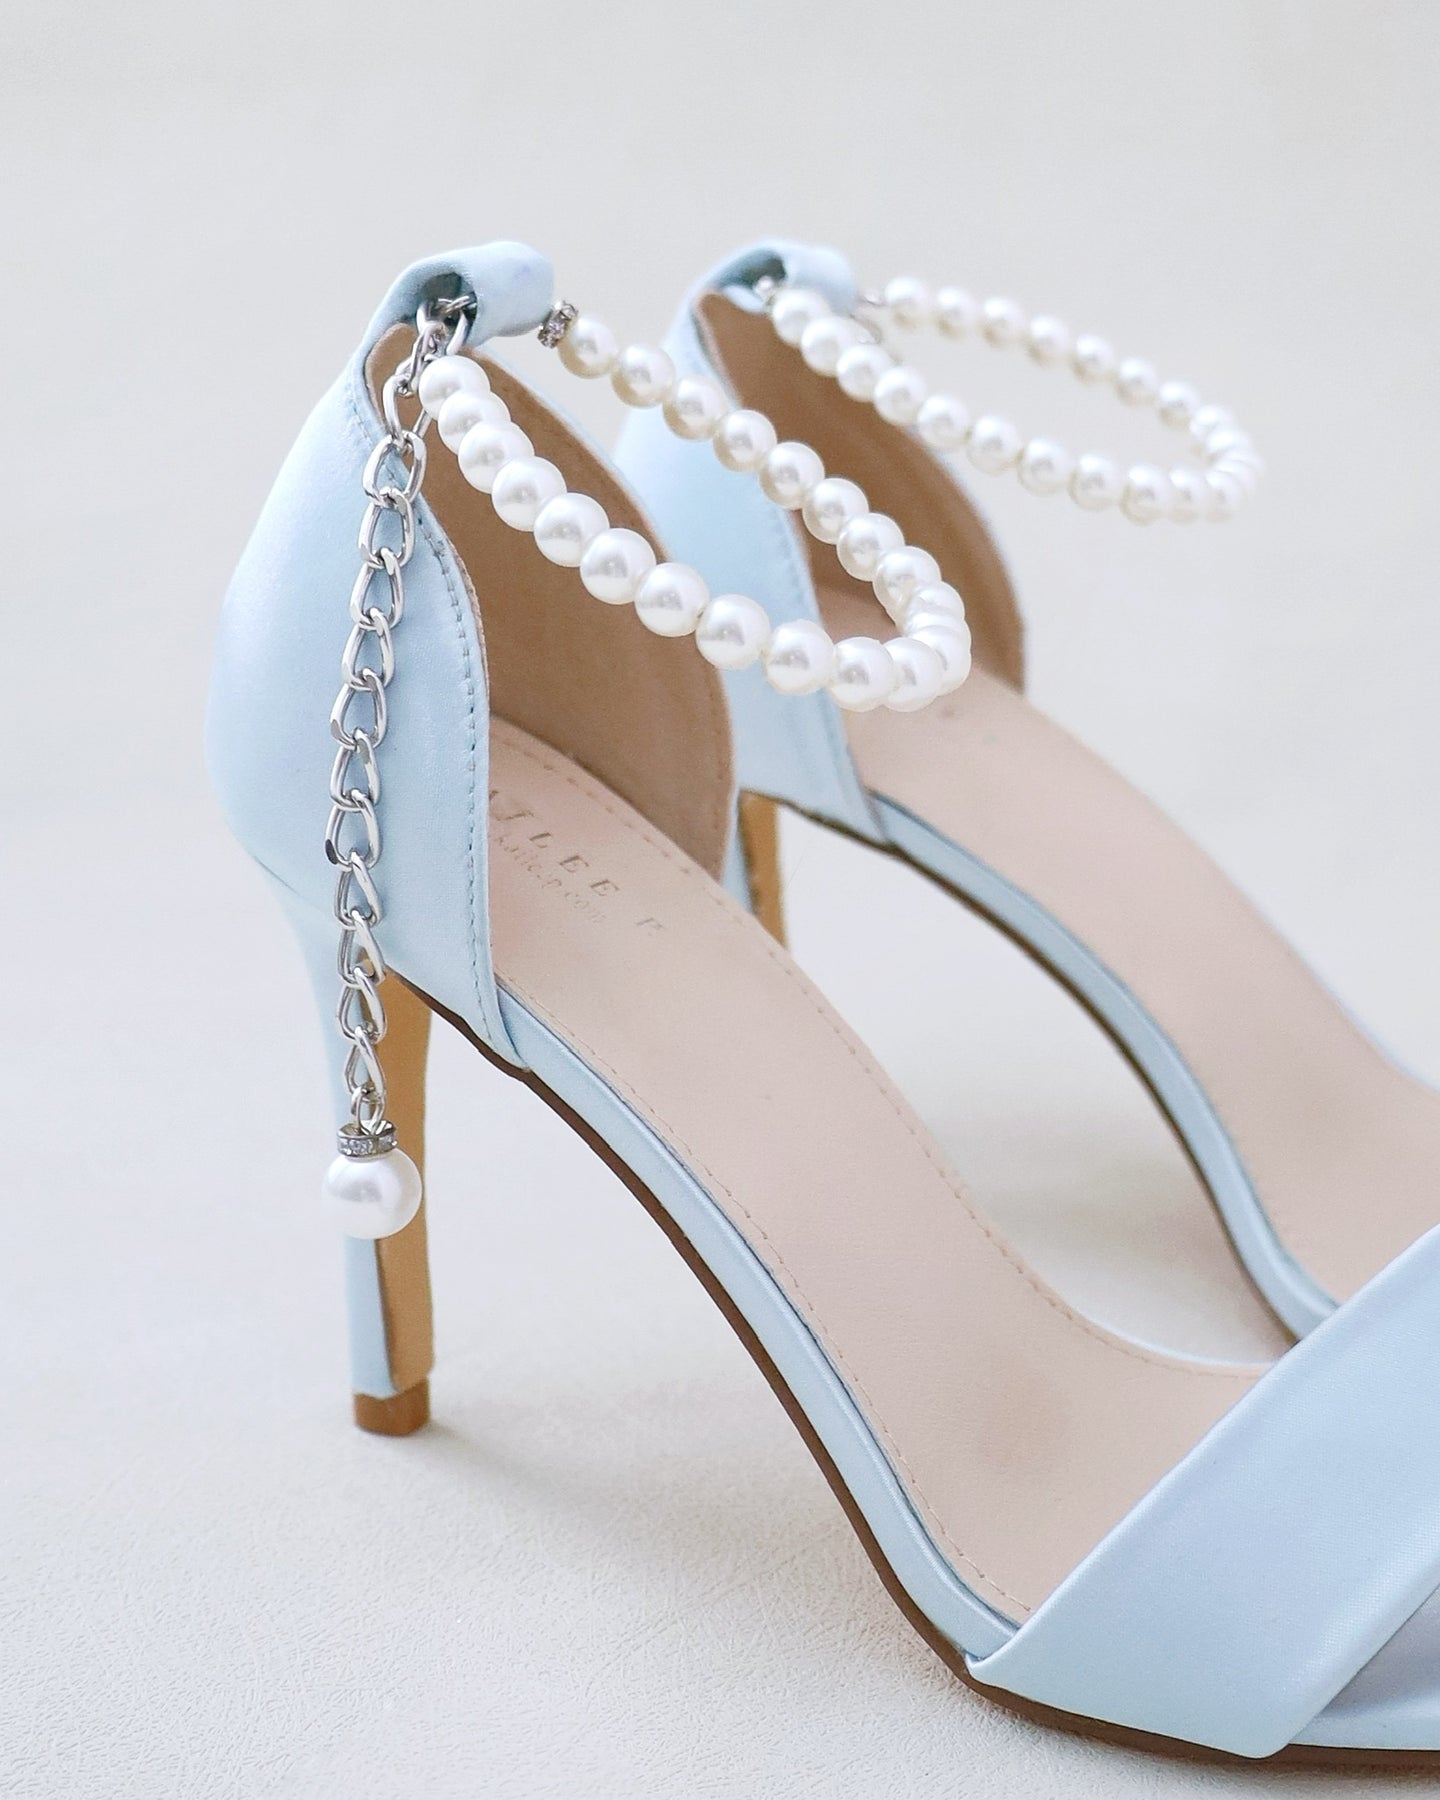 Women Thin Heel Sandals Pointed Toe High Heels White Blue Lace Wedding  Shoes Pointed Toe Lace Flower Pearls Pumps